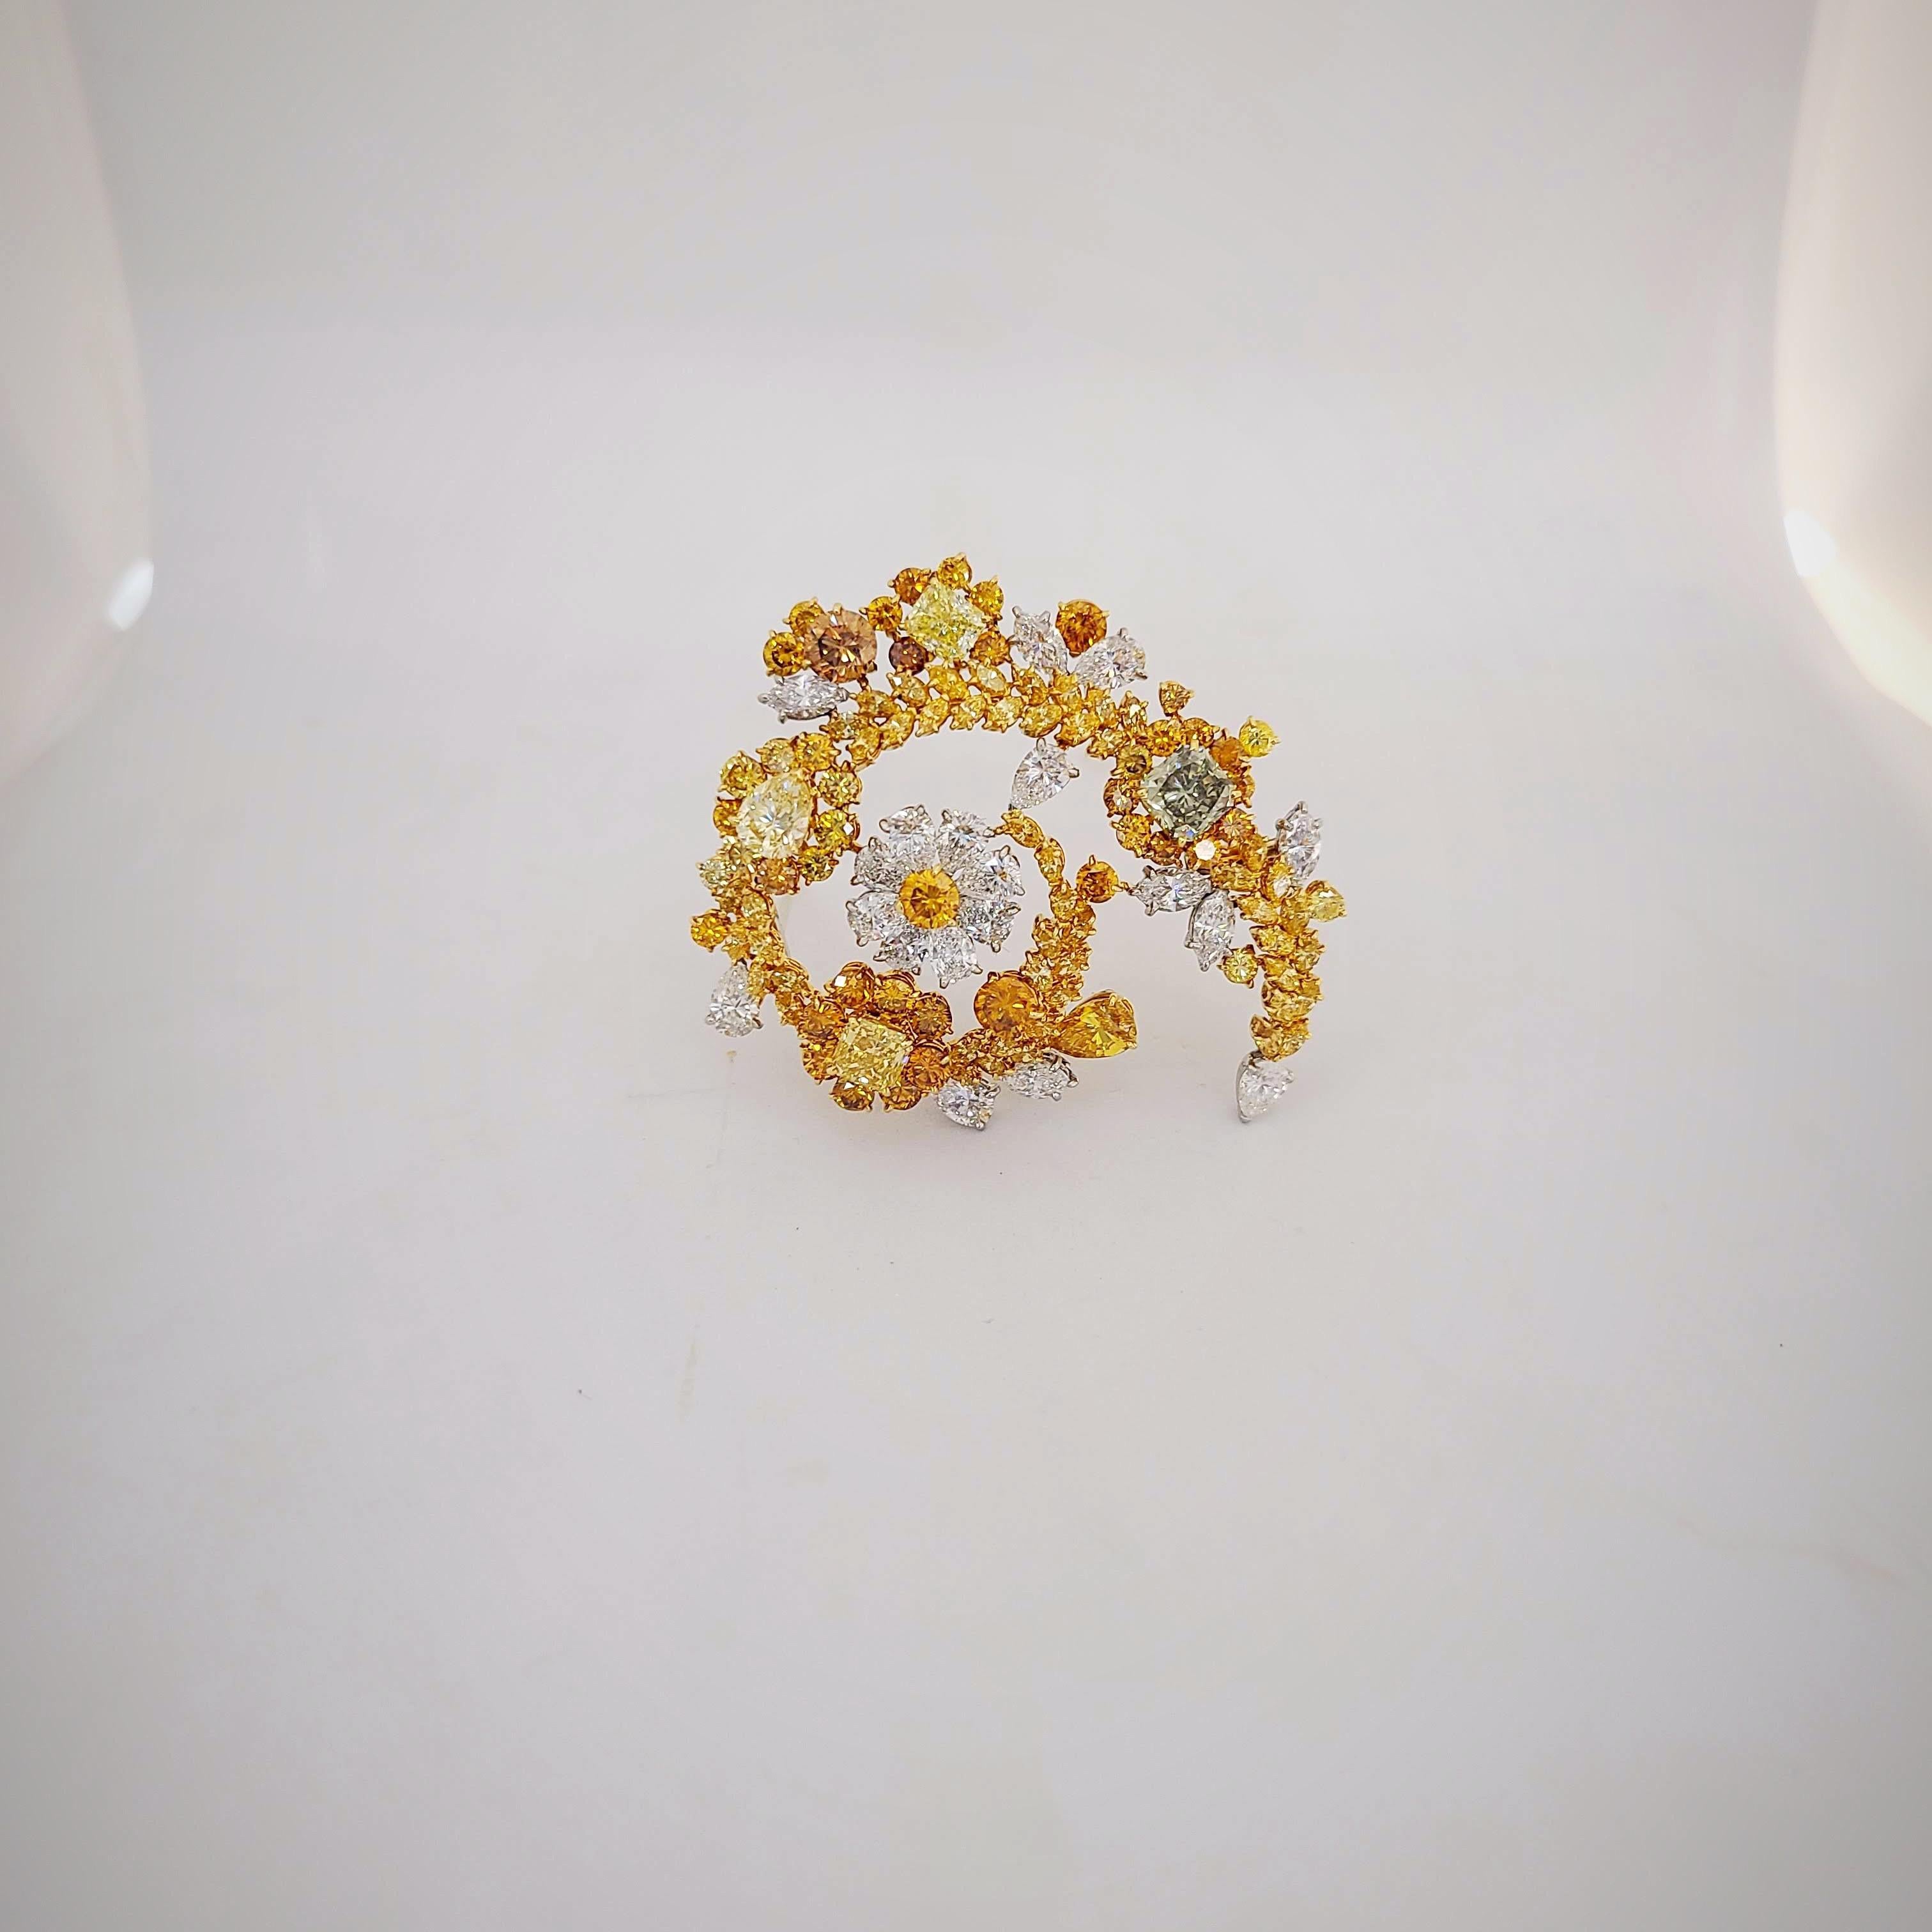 Cellini 18 Karat Yellow Gold Brooch 19.85 Carat Natural Fancy Colored Diamonds For Sale 3